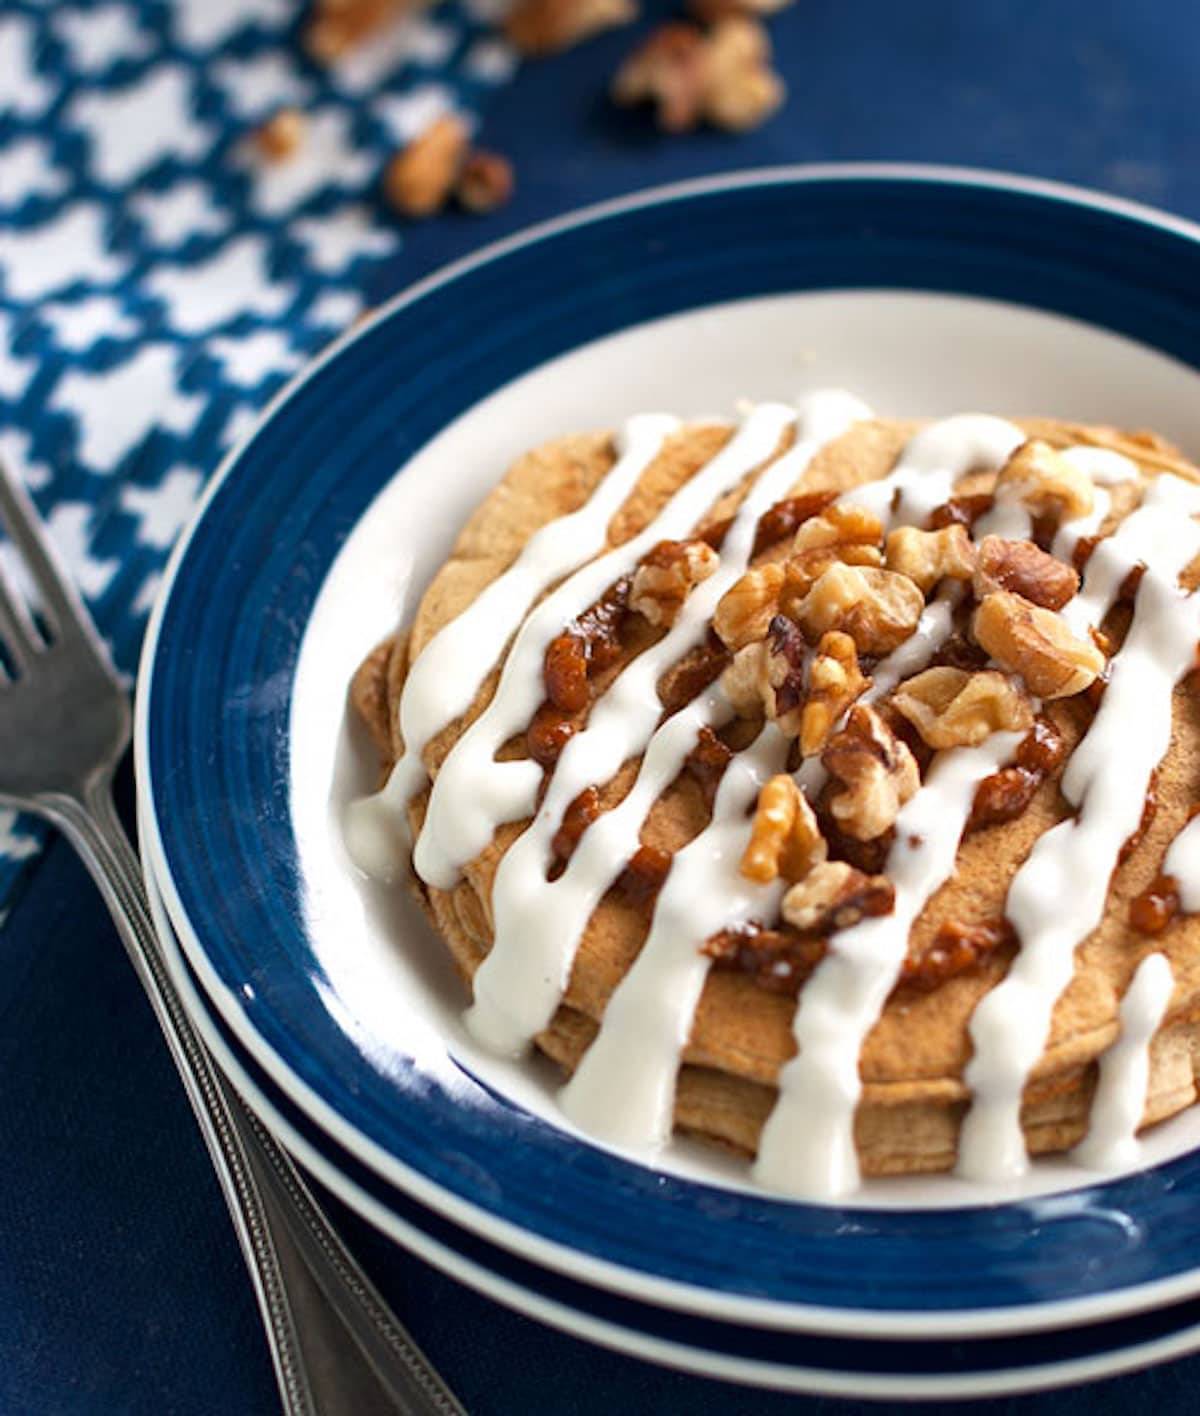 Cinnamon roll pancakes with Greek yogurt frosting in a blue and white bowl.